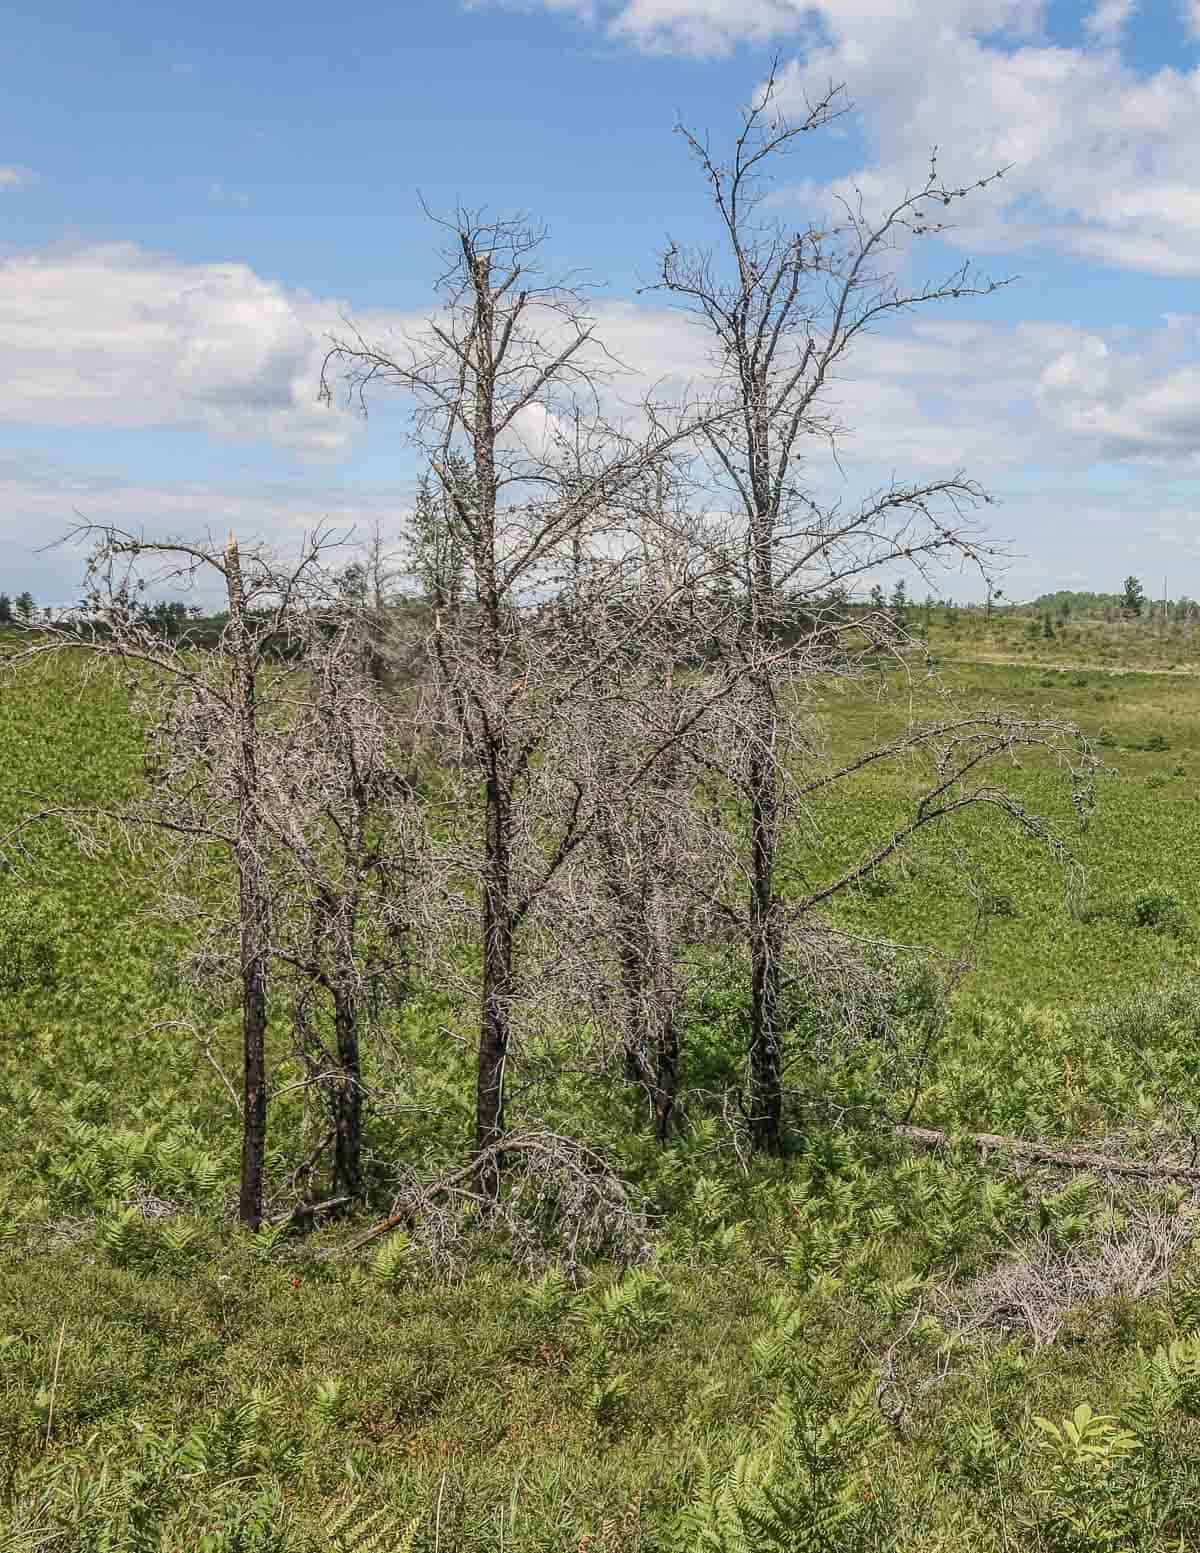 A group of burned trees surrounded by lush vegetation. 